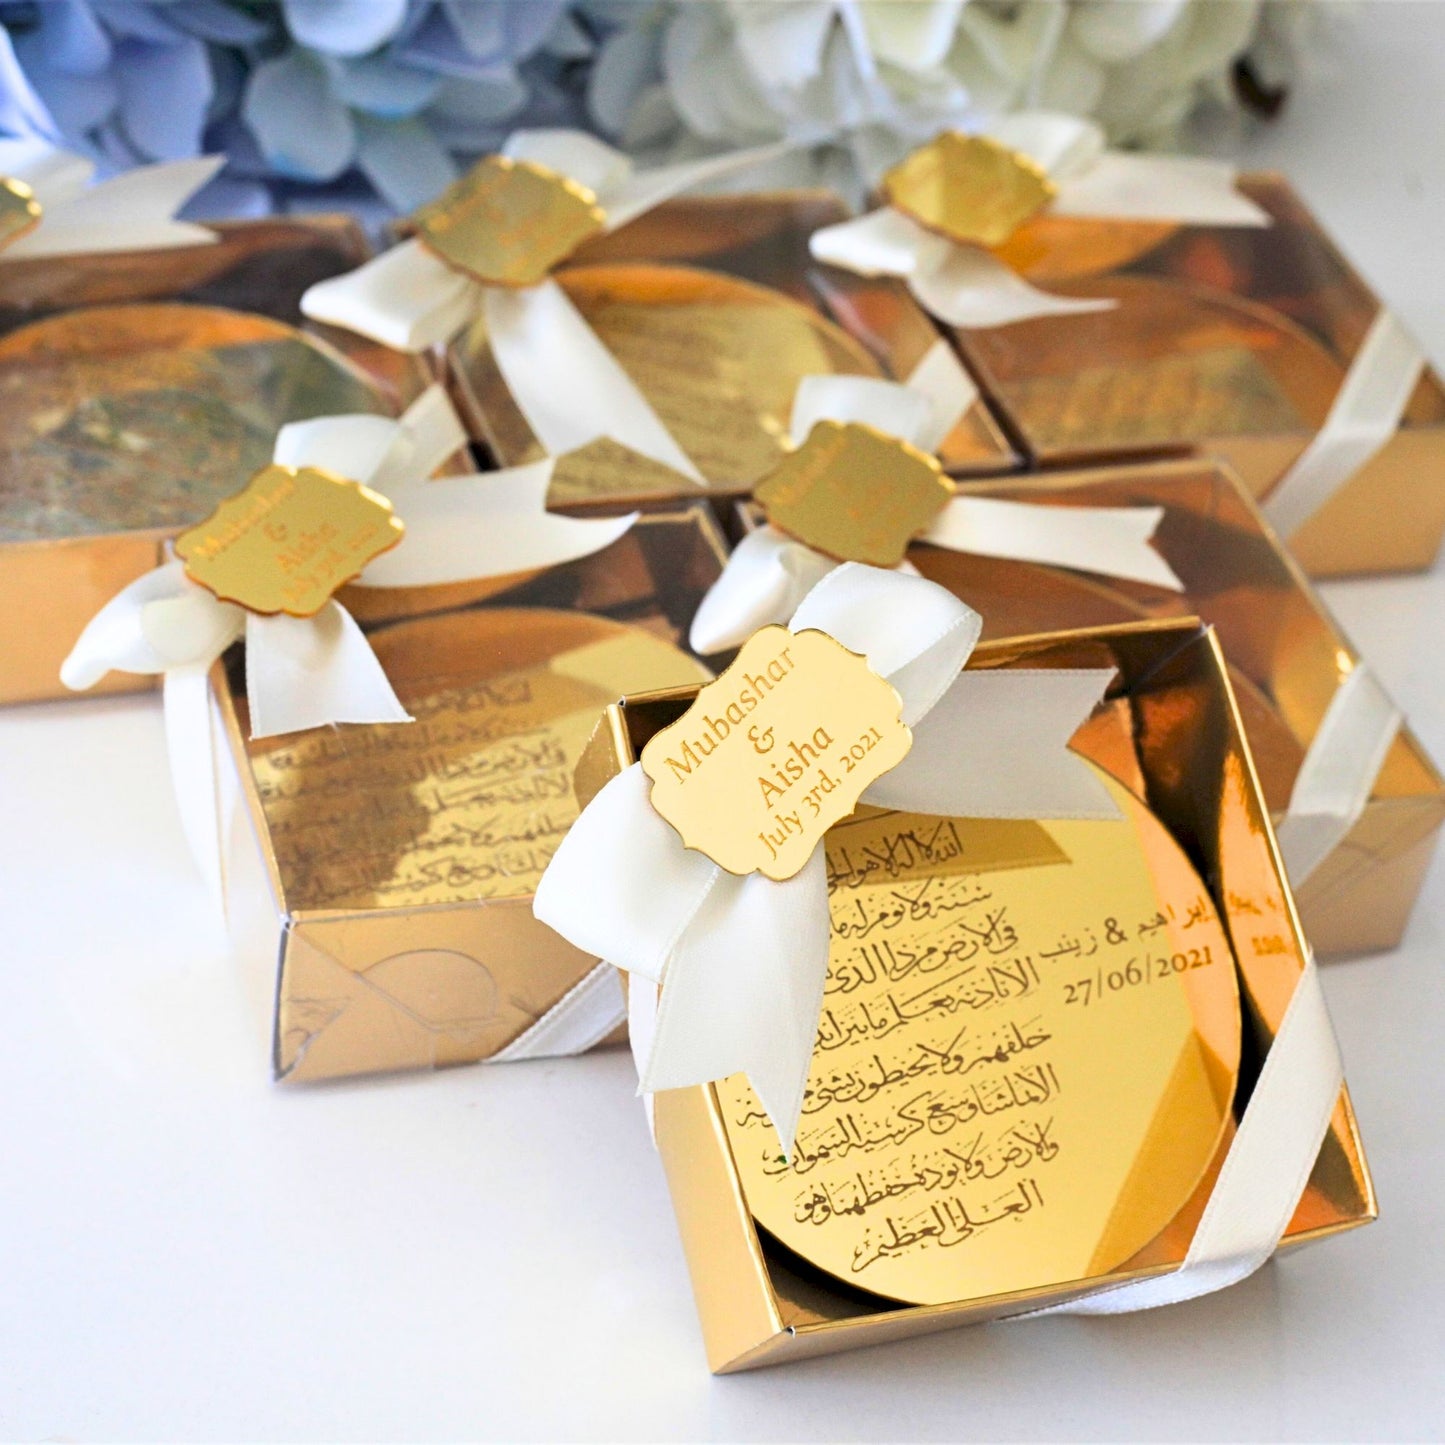 Personalized Wedding Favor Ayatul Kursi Magnet Gold Acrylic Bow Design - Islamic Elite Favors is a handmade gift shop offering a wide variety of unique and personalized gifts for all occasions. Whether you're looking for the perfect Ramadan, Eid, Hajj, wedding gift or something special for a birthday, baby shower or anniversary, we have something for everyone. High quality, made with love.